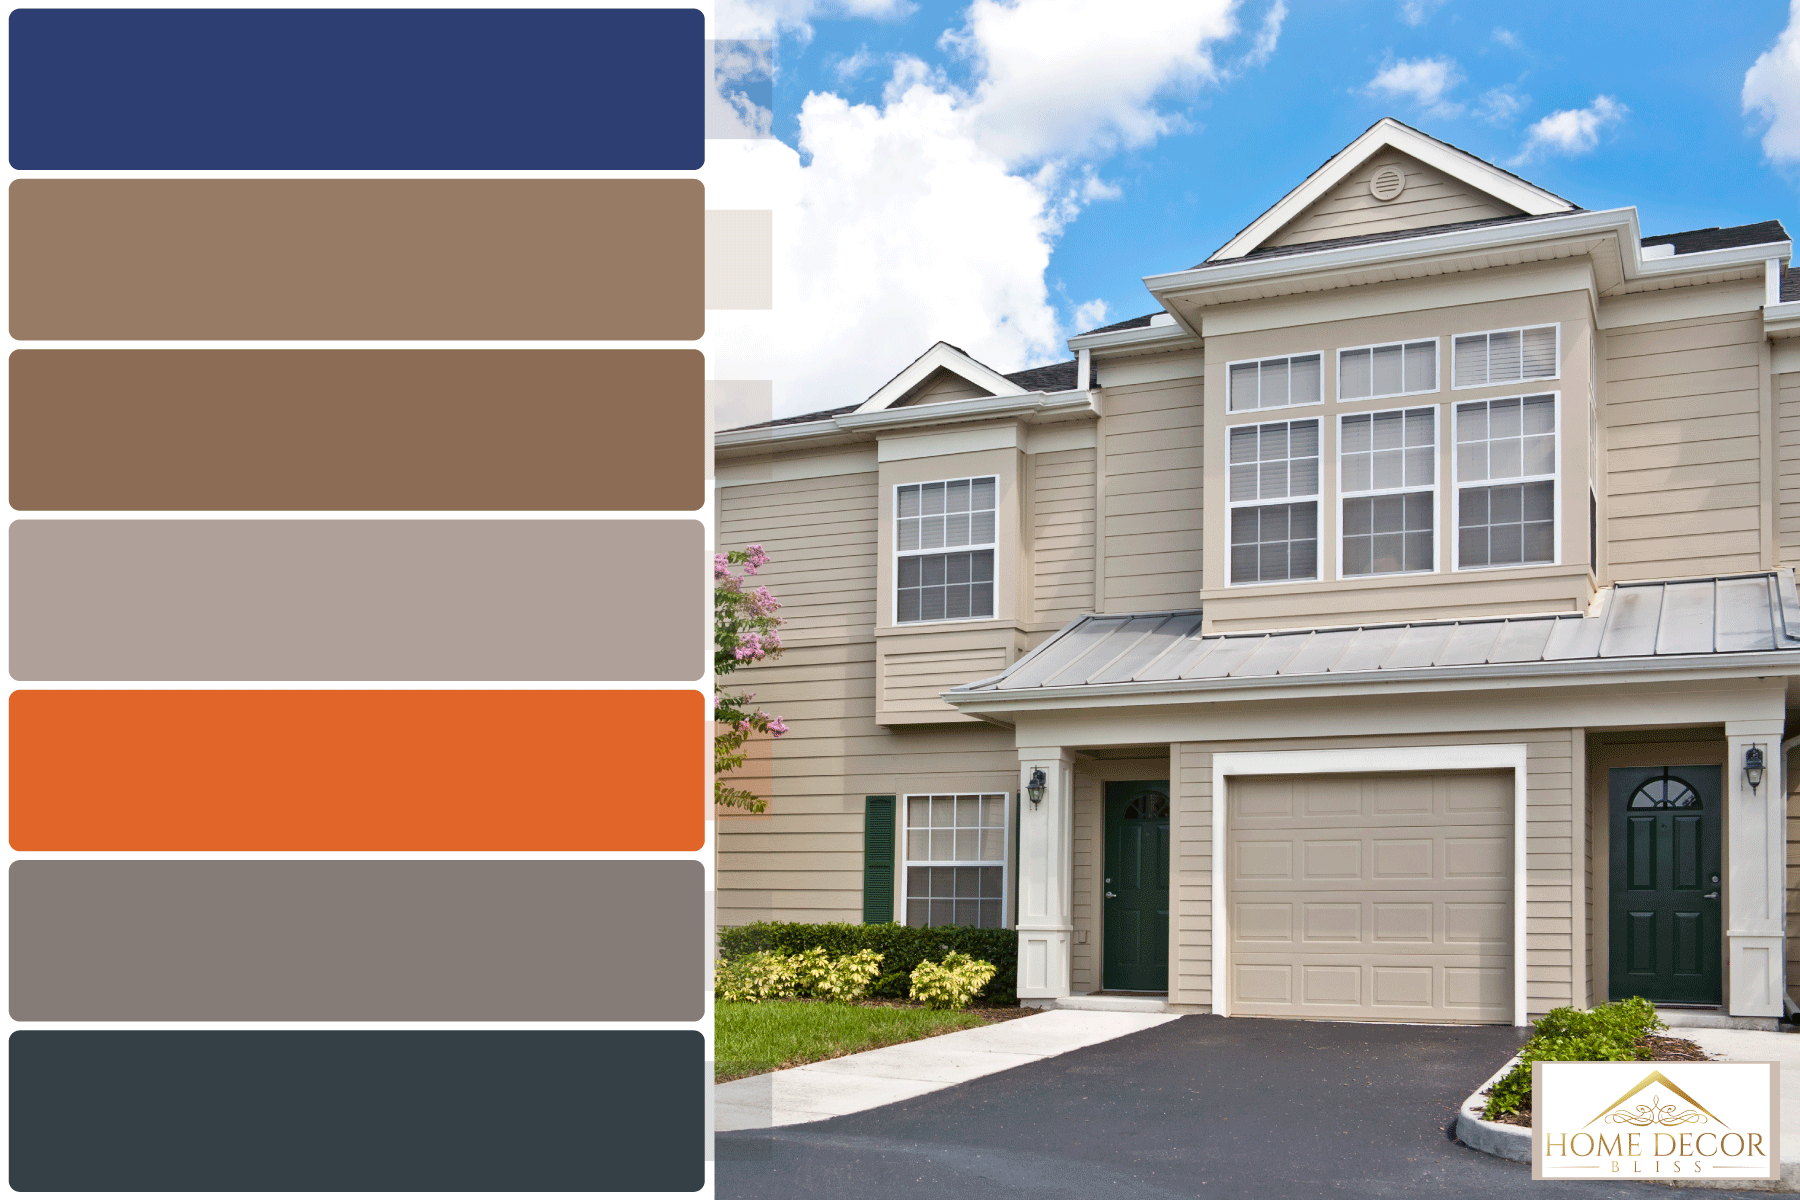 Tan PVC house sidings with white trims matched with nice landscaping, Tan Or Beige House? 11 Exterior Color Schemes To Consider